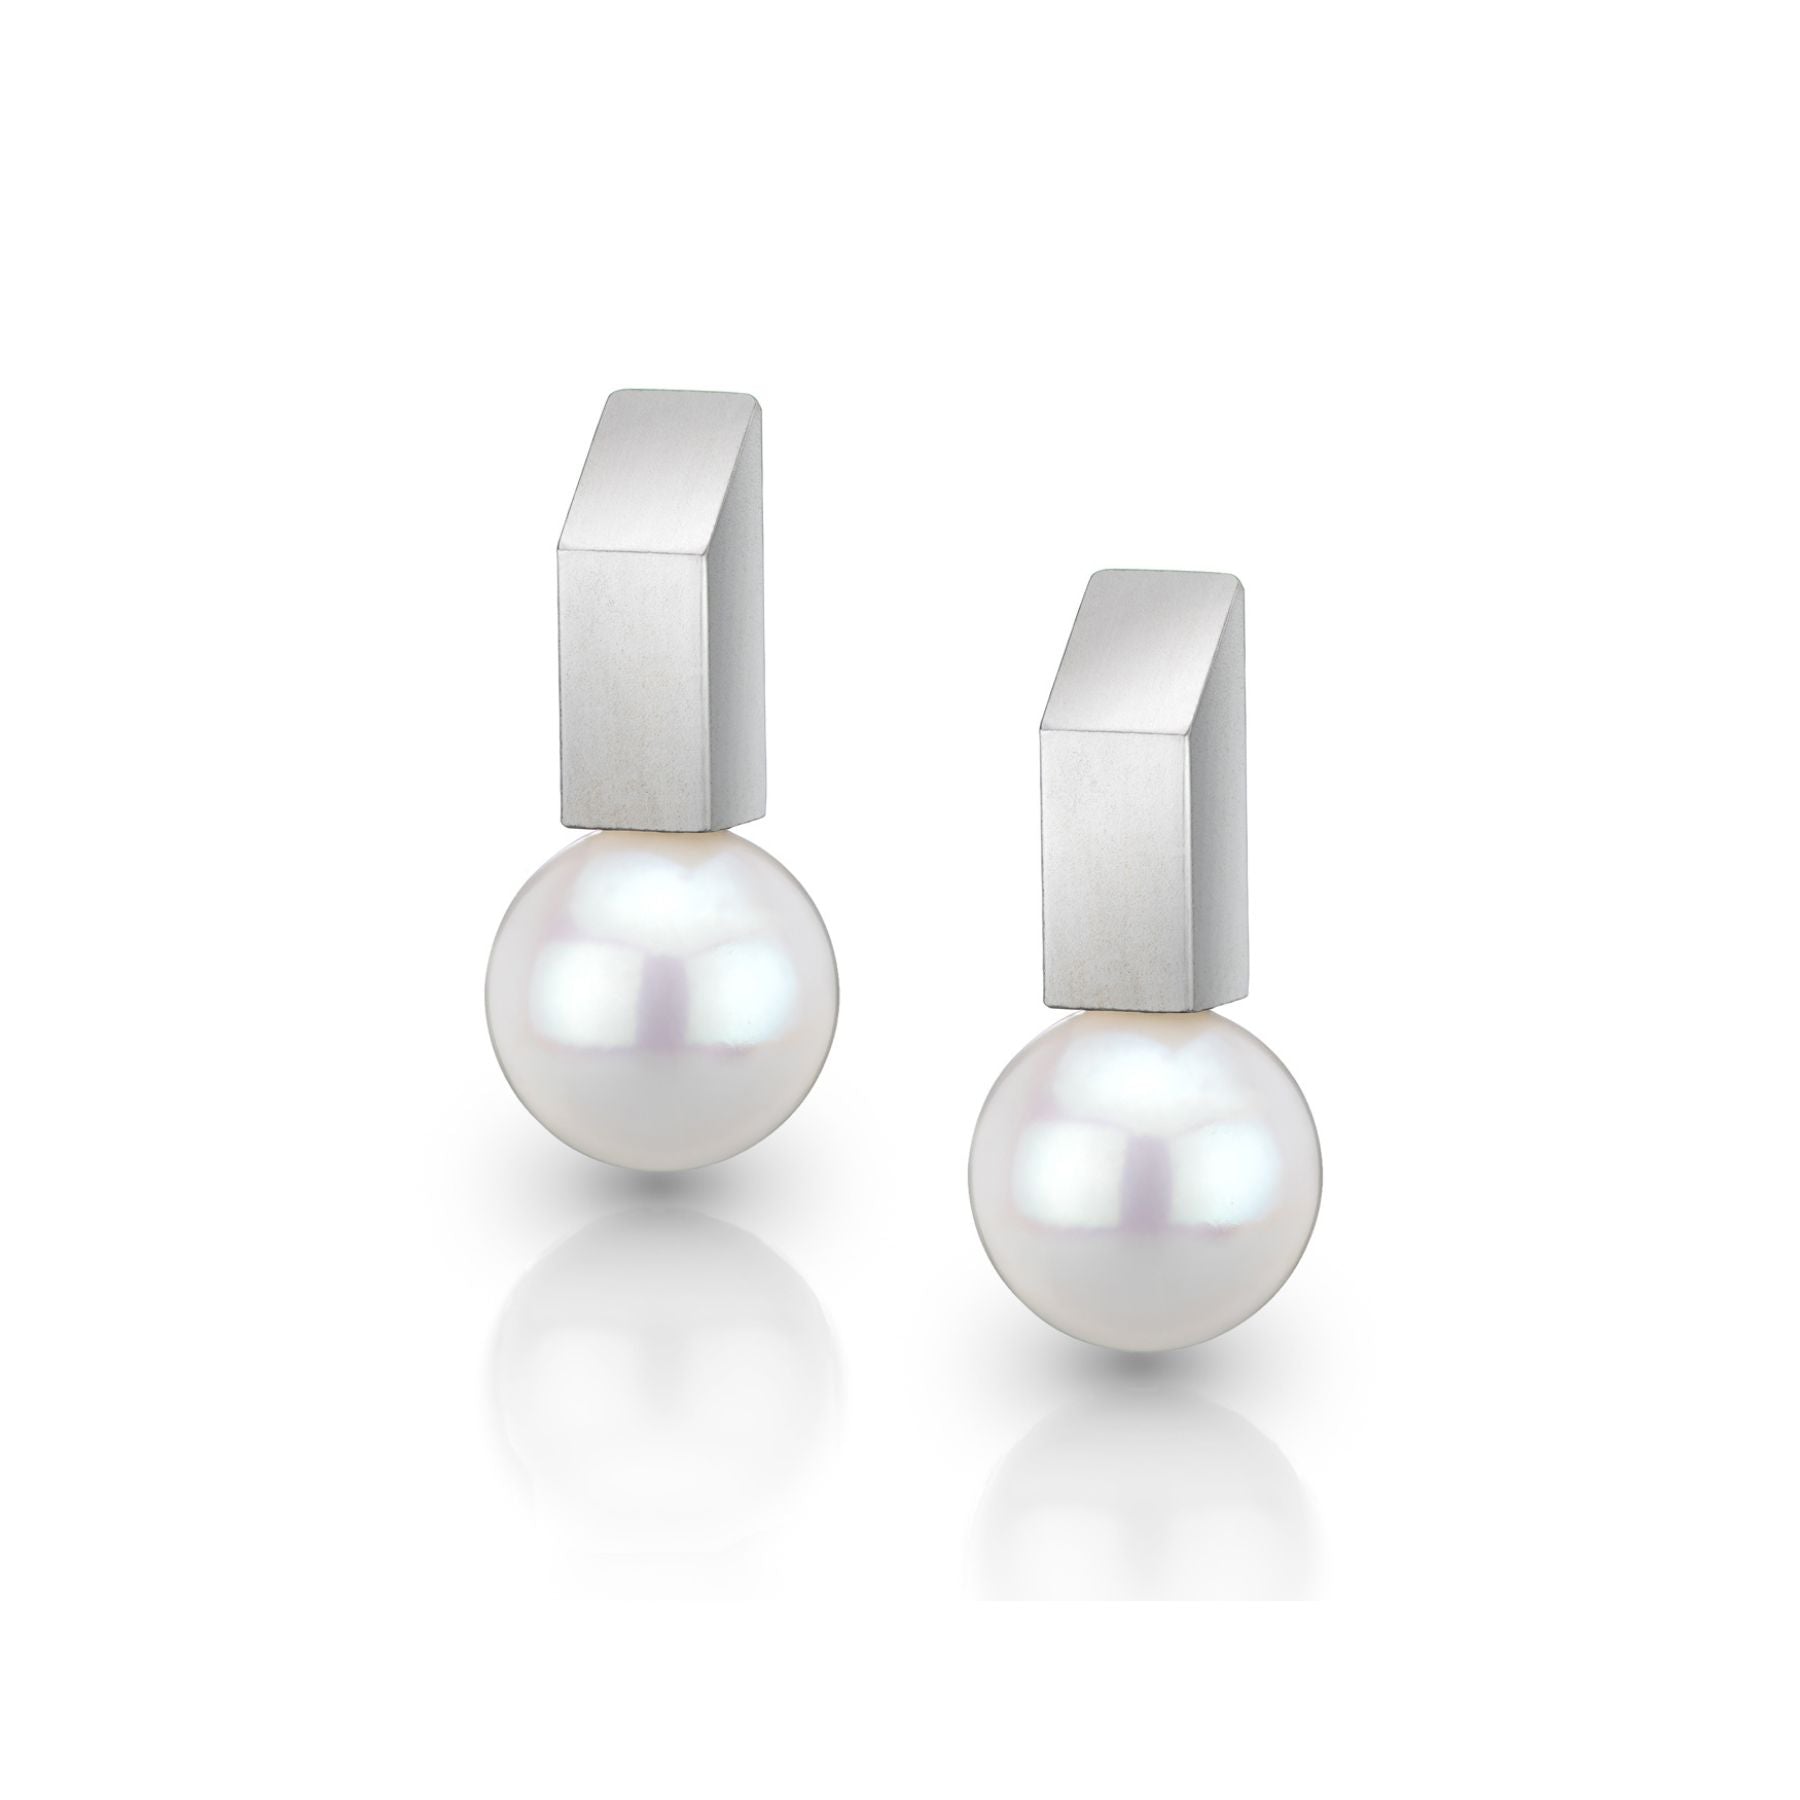 Rectangular Pearl Bar Earrings With Wide Bar Bar Collection Pearls